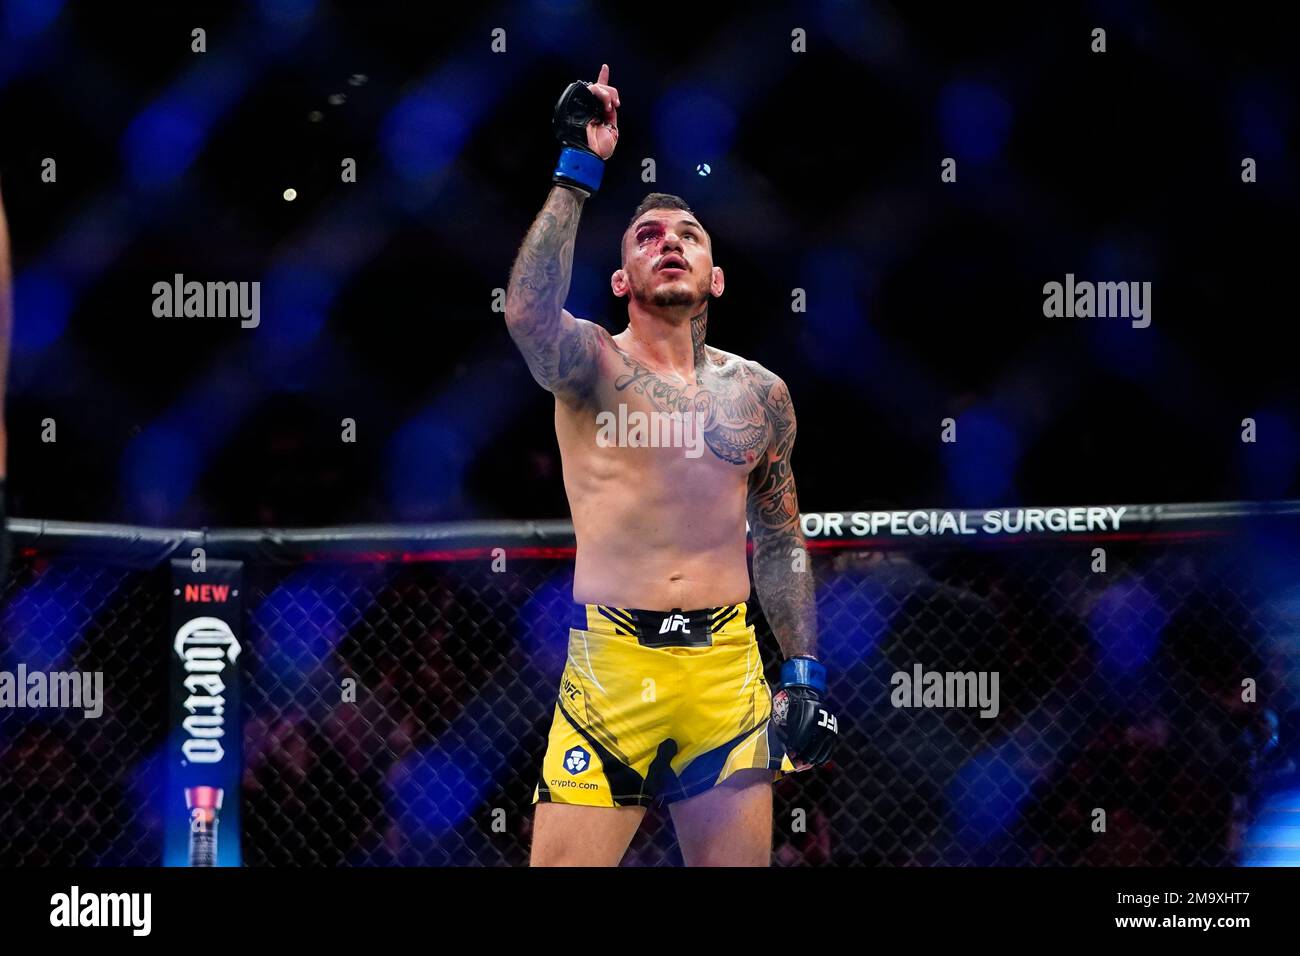 Brazil's Renato Moicano celebrates after a lightweight bout against New  Zealand's Brad Riddell at the UFC 281 mixed martial arts event, Saturday,  Nov. 12, 2022, in New York. Moicano stopped Riddell in